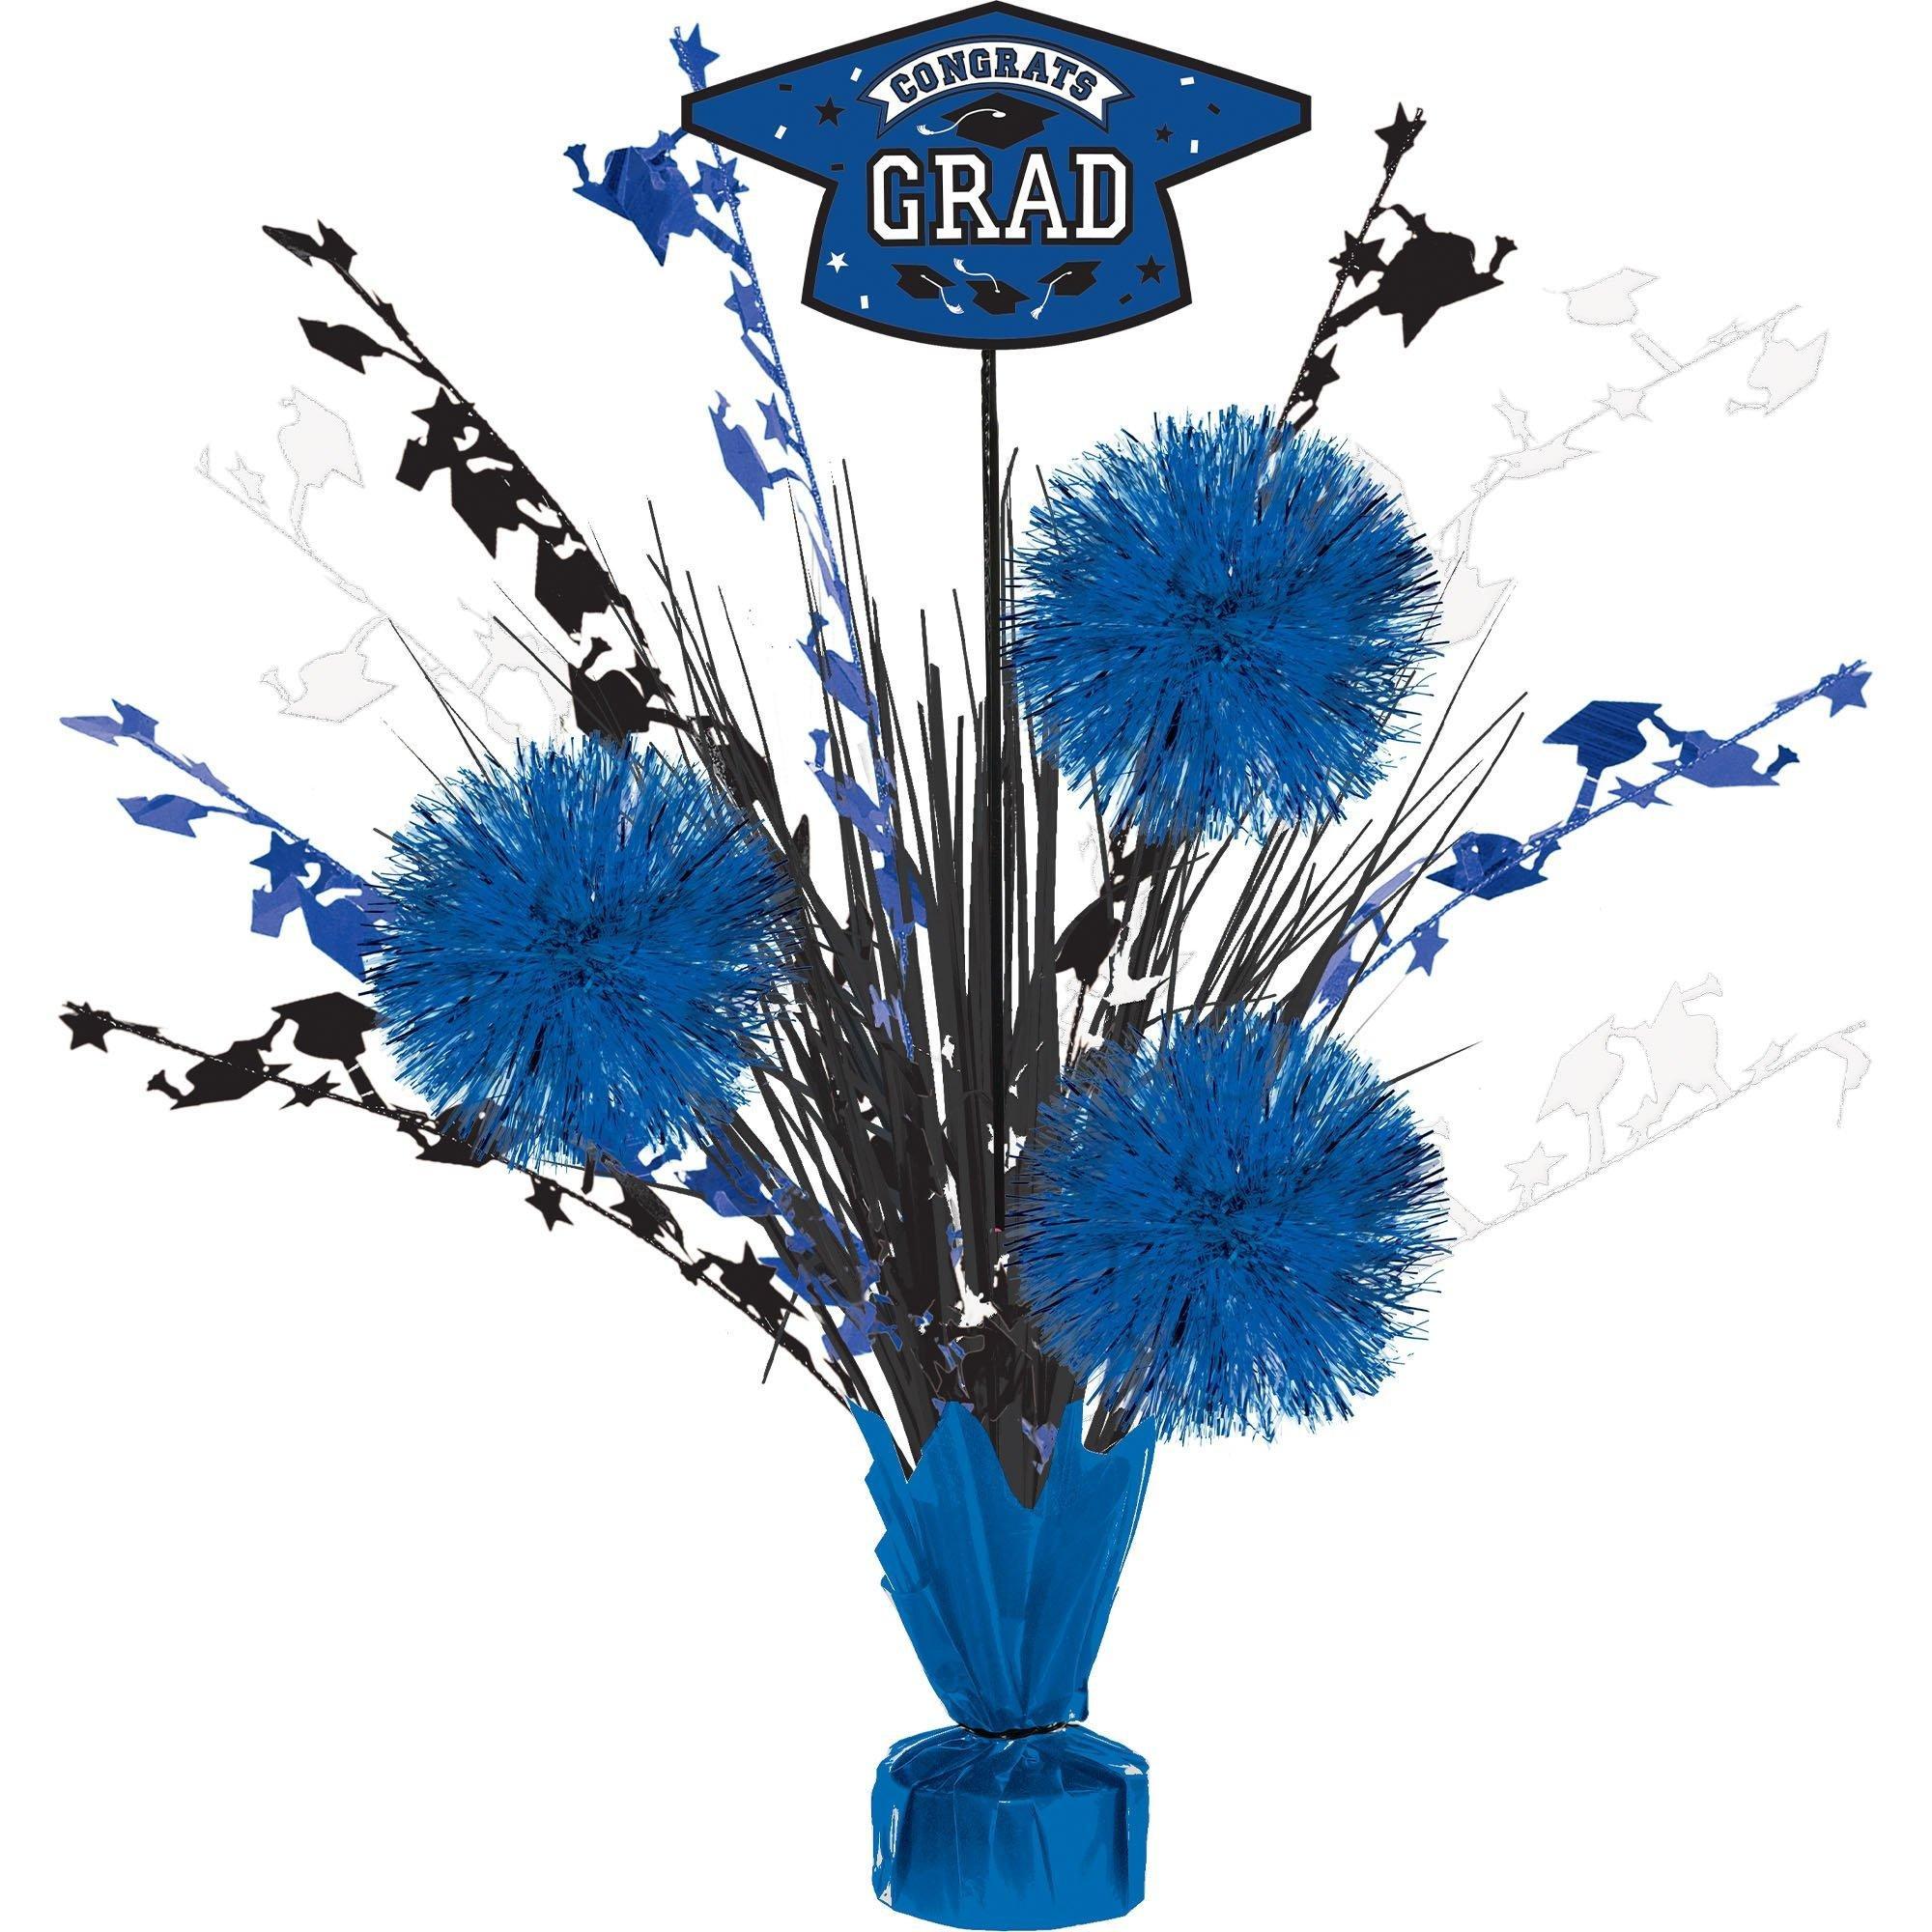 Graduation Party Supplies Kit for 40 with Decorations, Banners, Plates, Napkins, Cups - Blue Congrats Grad